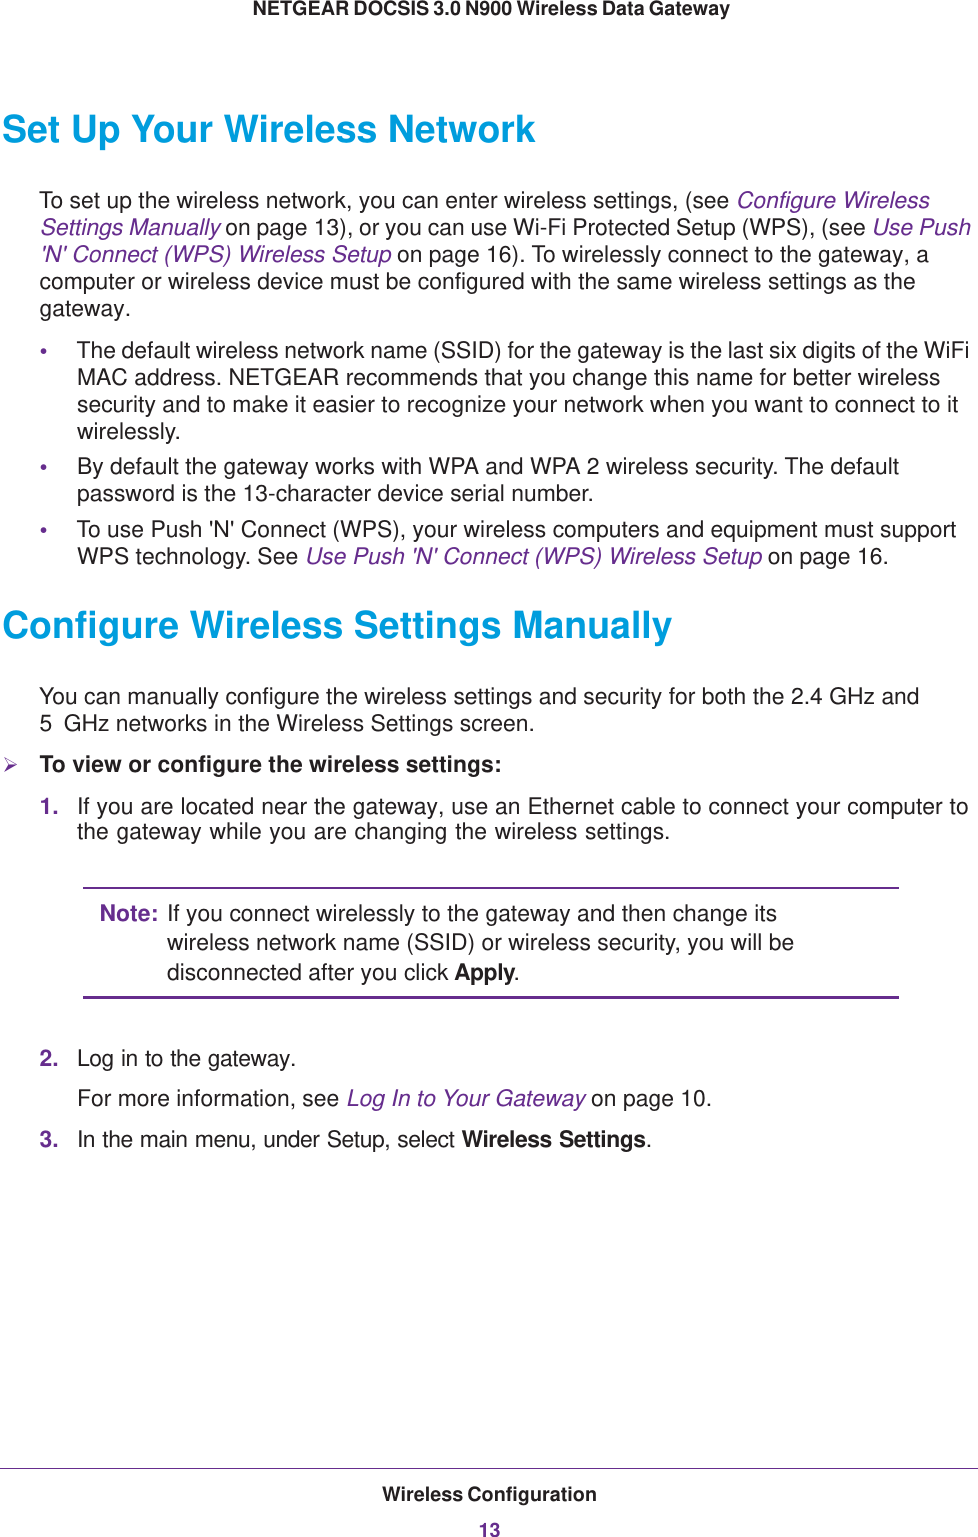 Wireless Configuration13 NETGEAR DOCSIS 3.0 N900 Wireless Data GatewaySet Up Your Wireless NetworkTo set up the wireless network, you can enter wireless settings, (see Configure Wireless Settings Manually on page  13), or you can use Wi-Fi Protected Setup (WPS), (see Use Push &apos;N&apos; Connect (WPS) Wireless Setup on page  16). To wirelessly connect to the gateway, a computer or wireless device must be configured with the same wireless settings as the gateway.•The default wireless network name (SSID) for the gateway is the last six digits of the WiFi MAC address. NETGEAR recommends that you change this name for better wireless security and to make it easier to recognize your network when you want to connect to it wirelessly.•By default the gateway works with WPA and WPA 2 wireless security. The default password is the 13-character device serial number.•To use Push &apos;N&apos; Connect (WPS), your wireless computers and equipment must support WPS technology. See Use Push &apos;N&apos; Connect (WPS) Wireless Setup on page  16.Configure Wireless Settings ManuallyYou can manually configure the wireless settings and security for both the 2.4 GHz and 5  GHz networks in the Wireless Settings screen. To view or configure the wireless settings:1. If you are located near the gateway, use an Ethernet cable to connect your computer to the gateway while you are changing the wireless settings.Note: If you connect wirelessly to the gateway and then change its wireless network name (SSID) or wireless security, you will be disconnected after you click Apply. 2. Log in to the gateway. For more information, see Log In to Your Gateway on page  10. 3. In the main menu, under Setup, select Wireless Settings. 